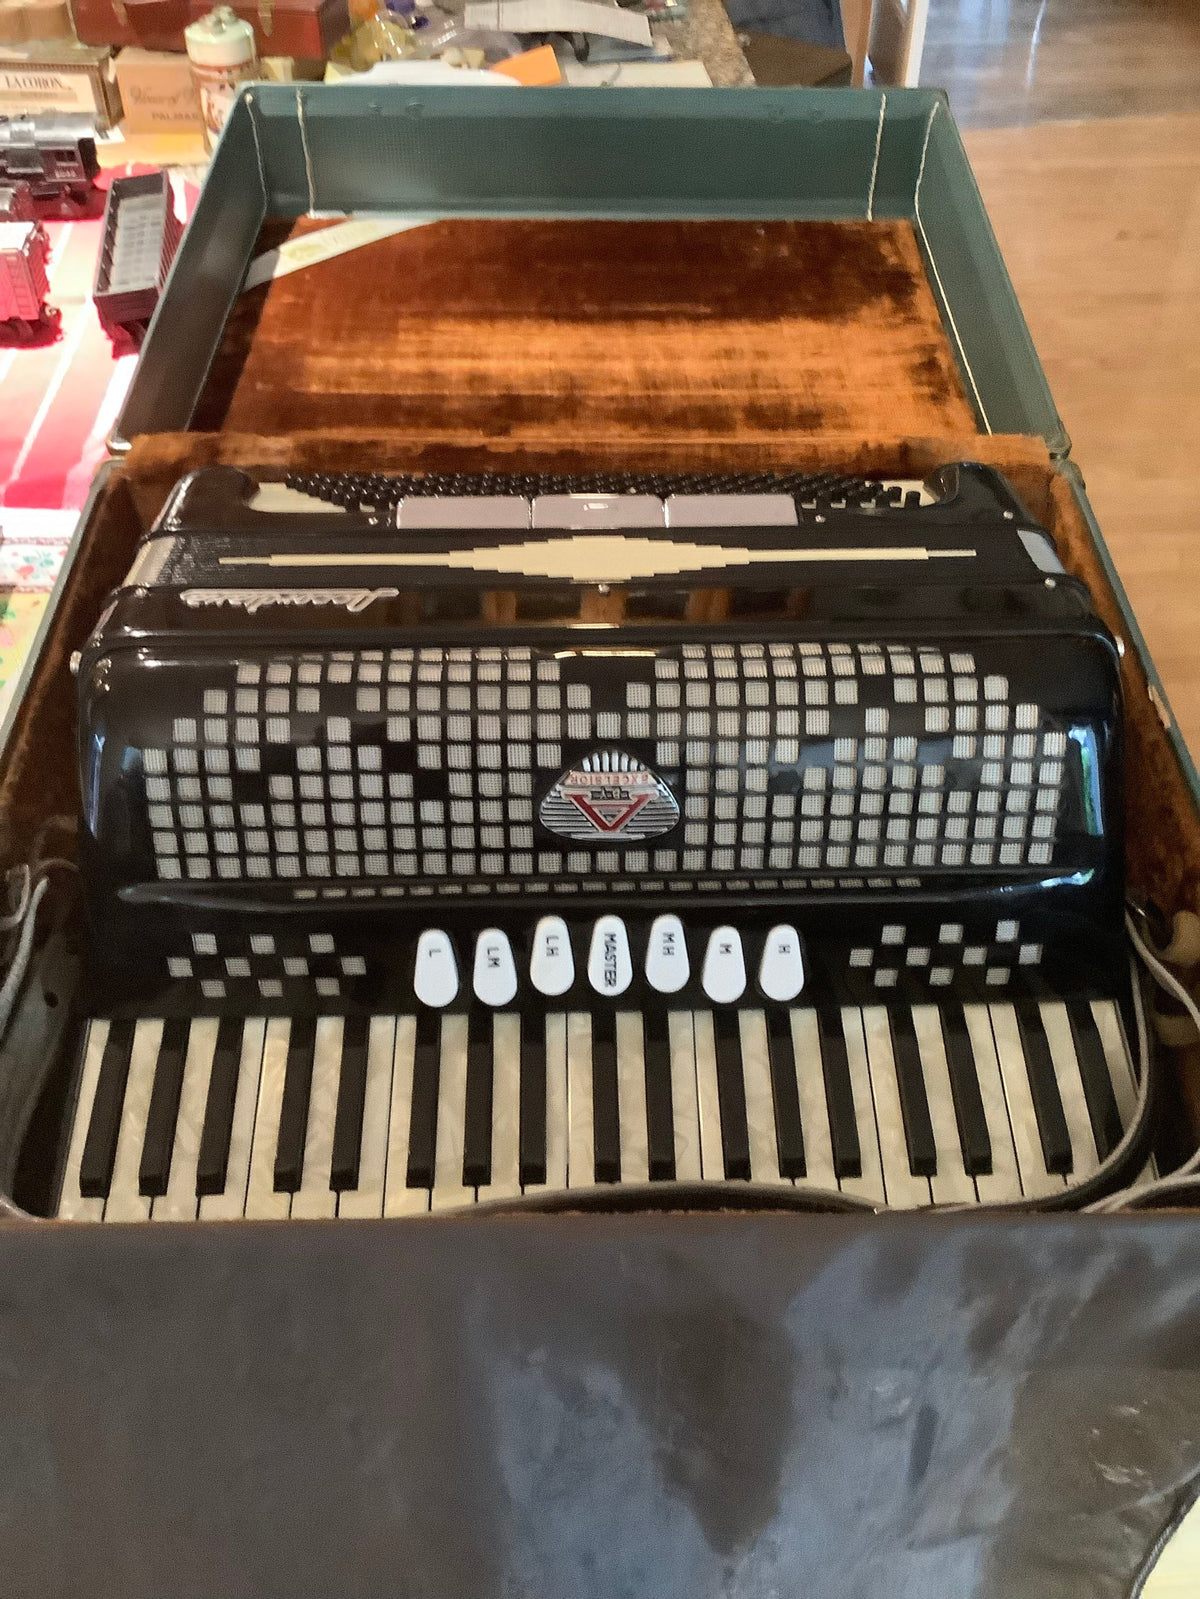 Excelsior Model 310 Accordion with original case and Straps.